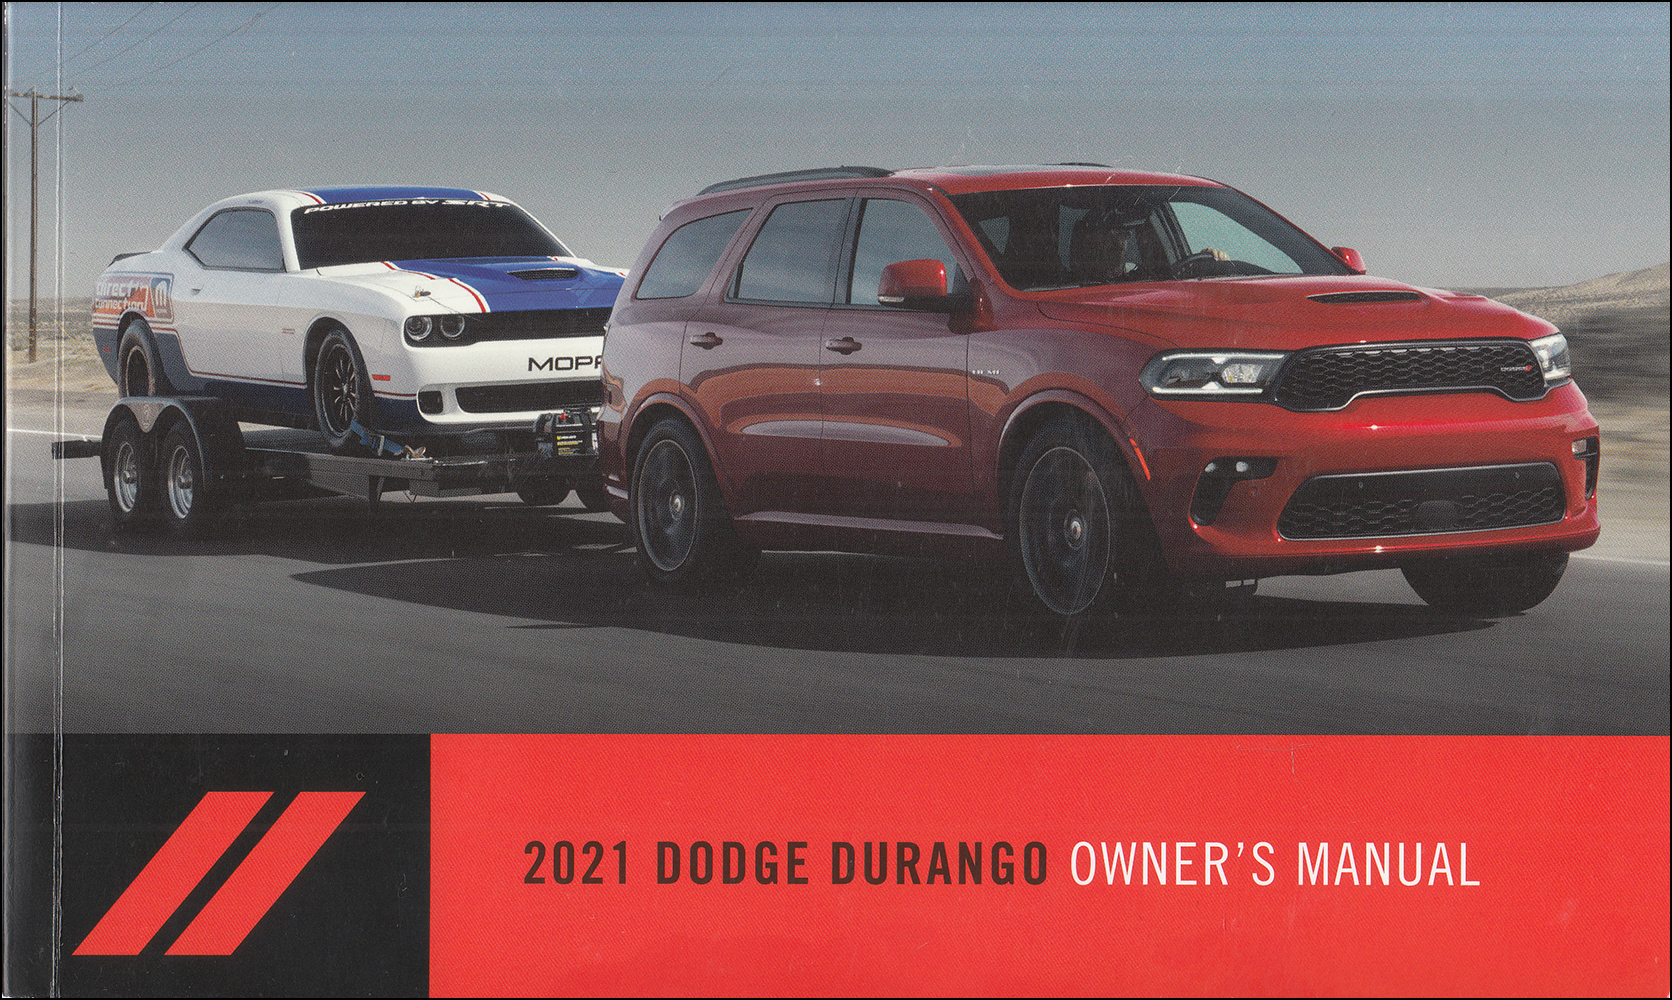 2021 Dodge Durango Owner's Manual Original Extended 356-page version